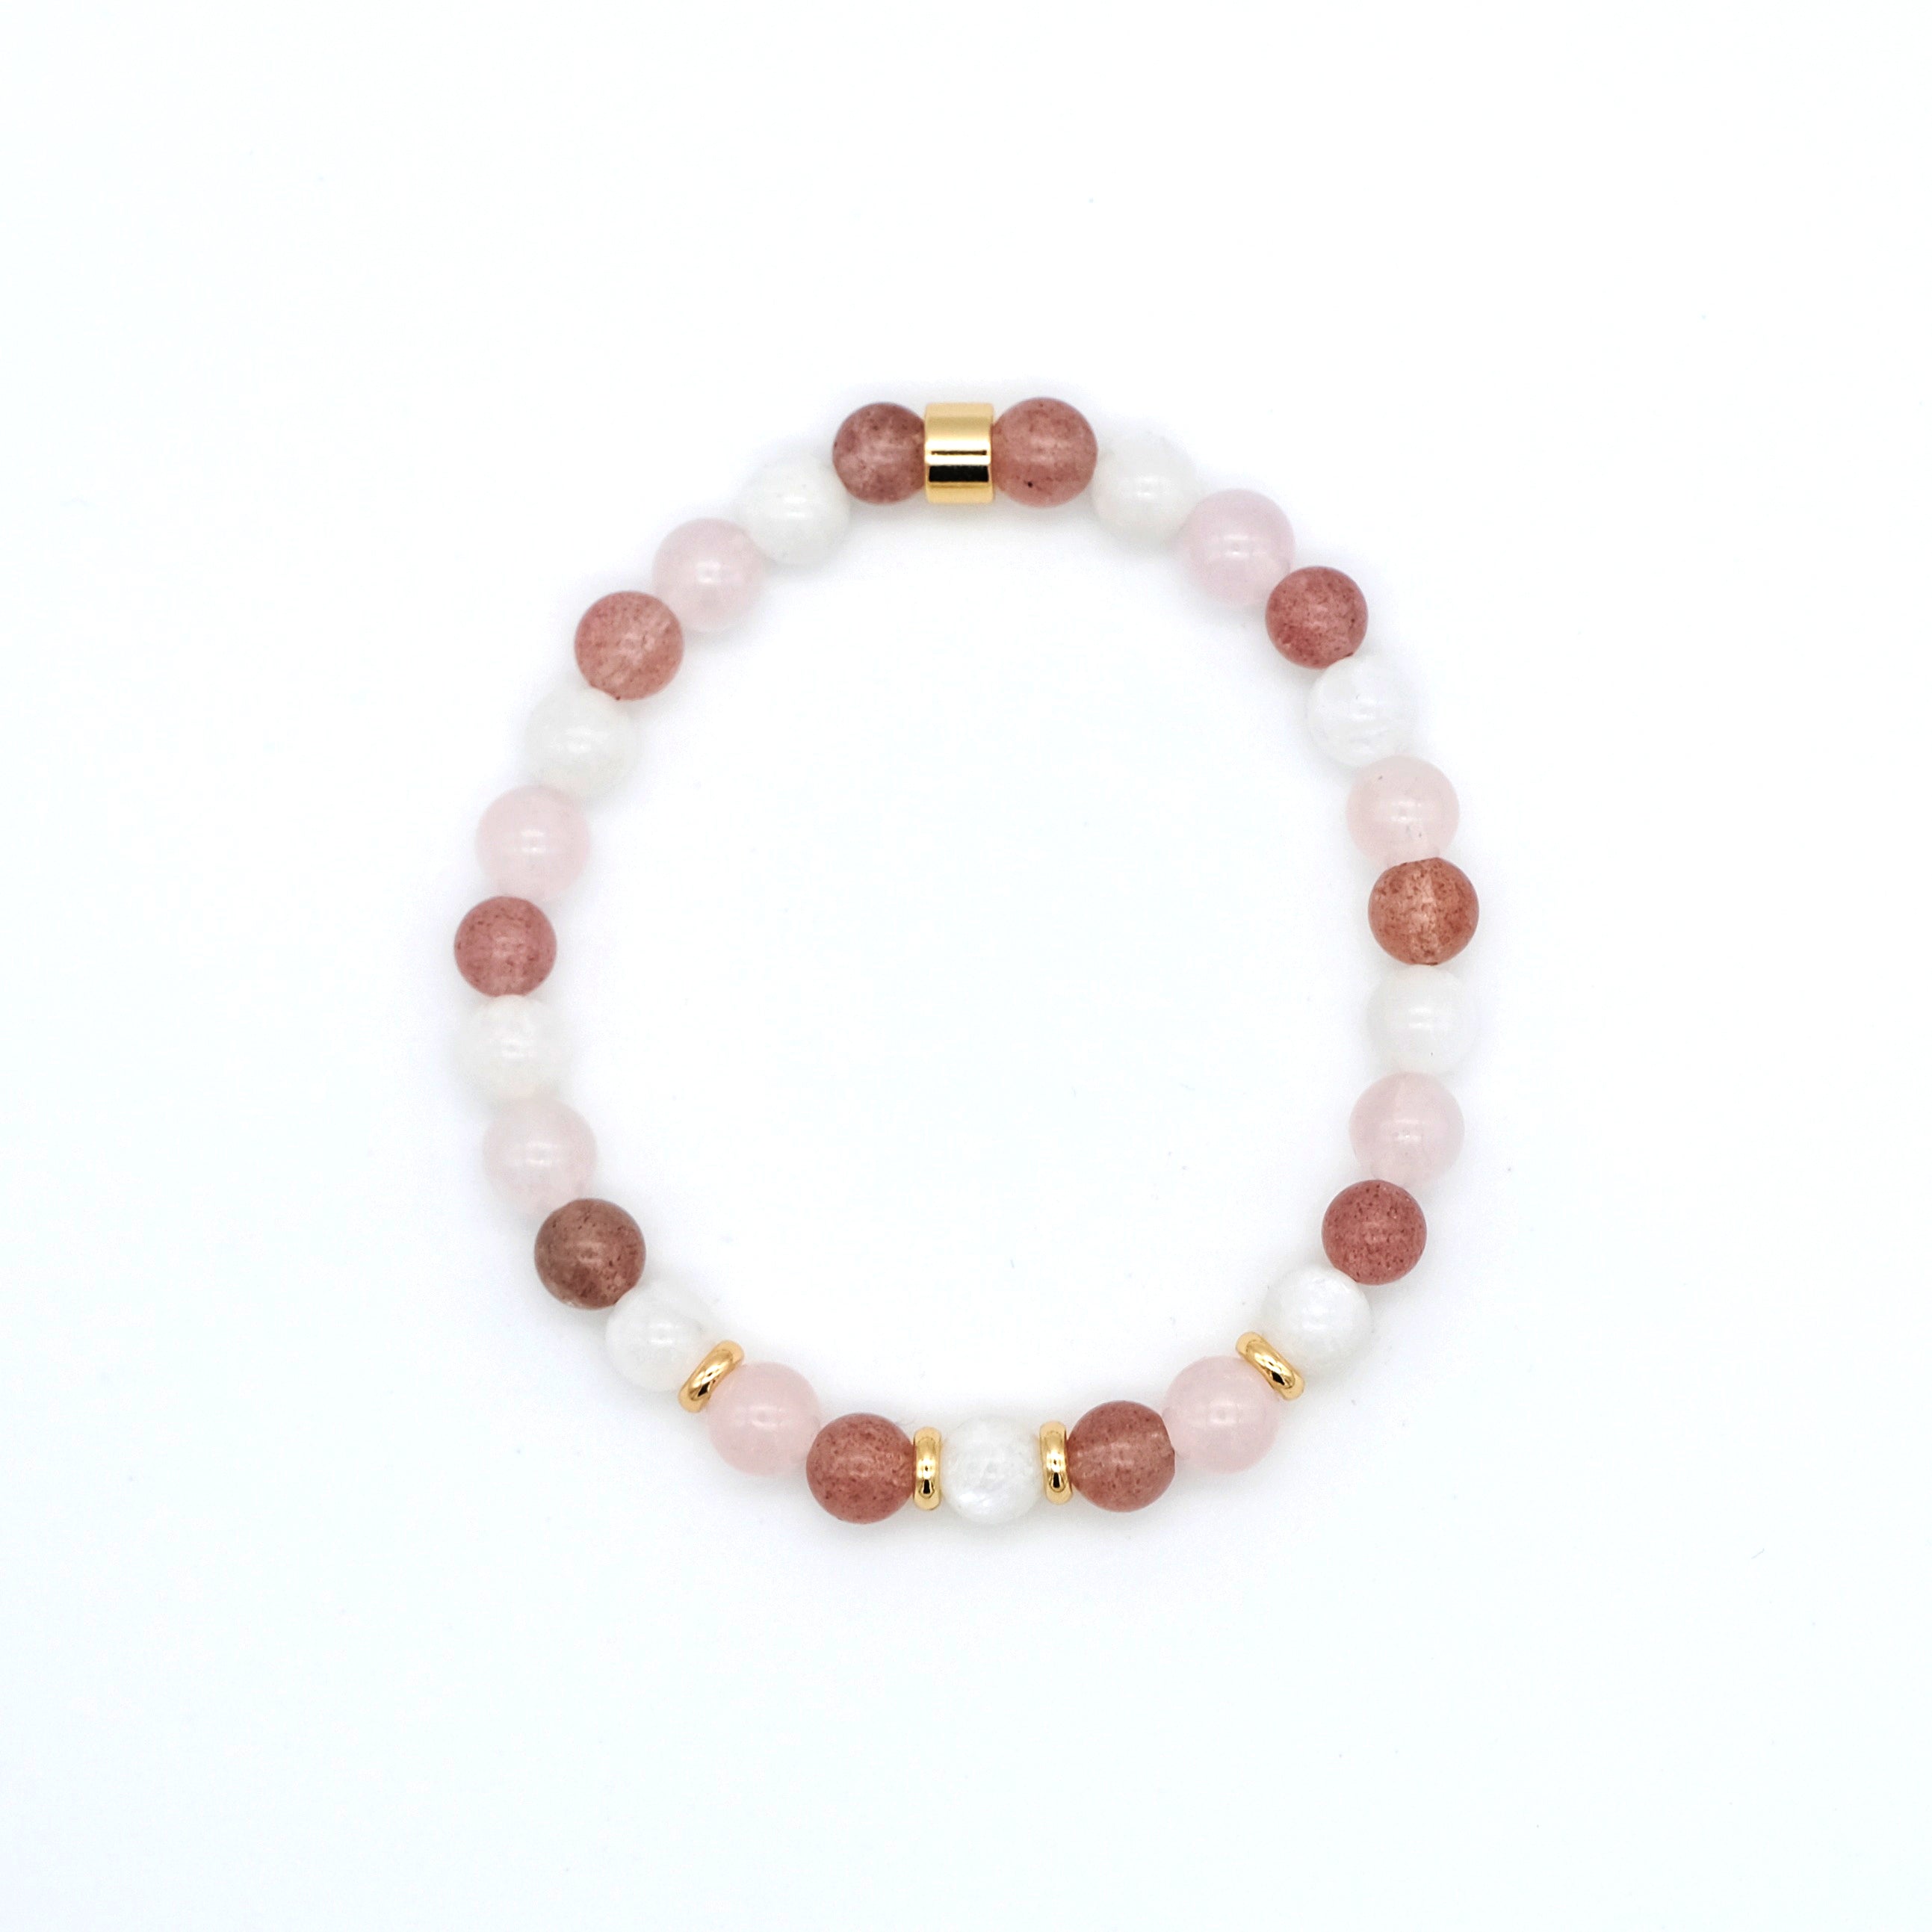 A moonstone, strawberry quartz and rose quartz gemstone bracelet in 6mm beads with gold accessories from above